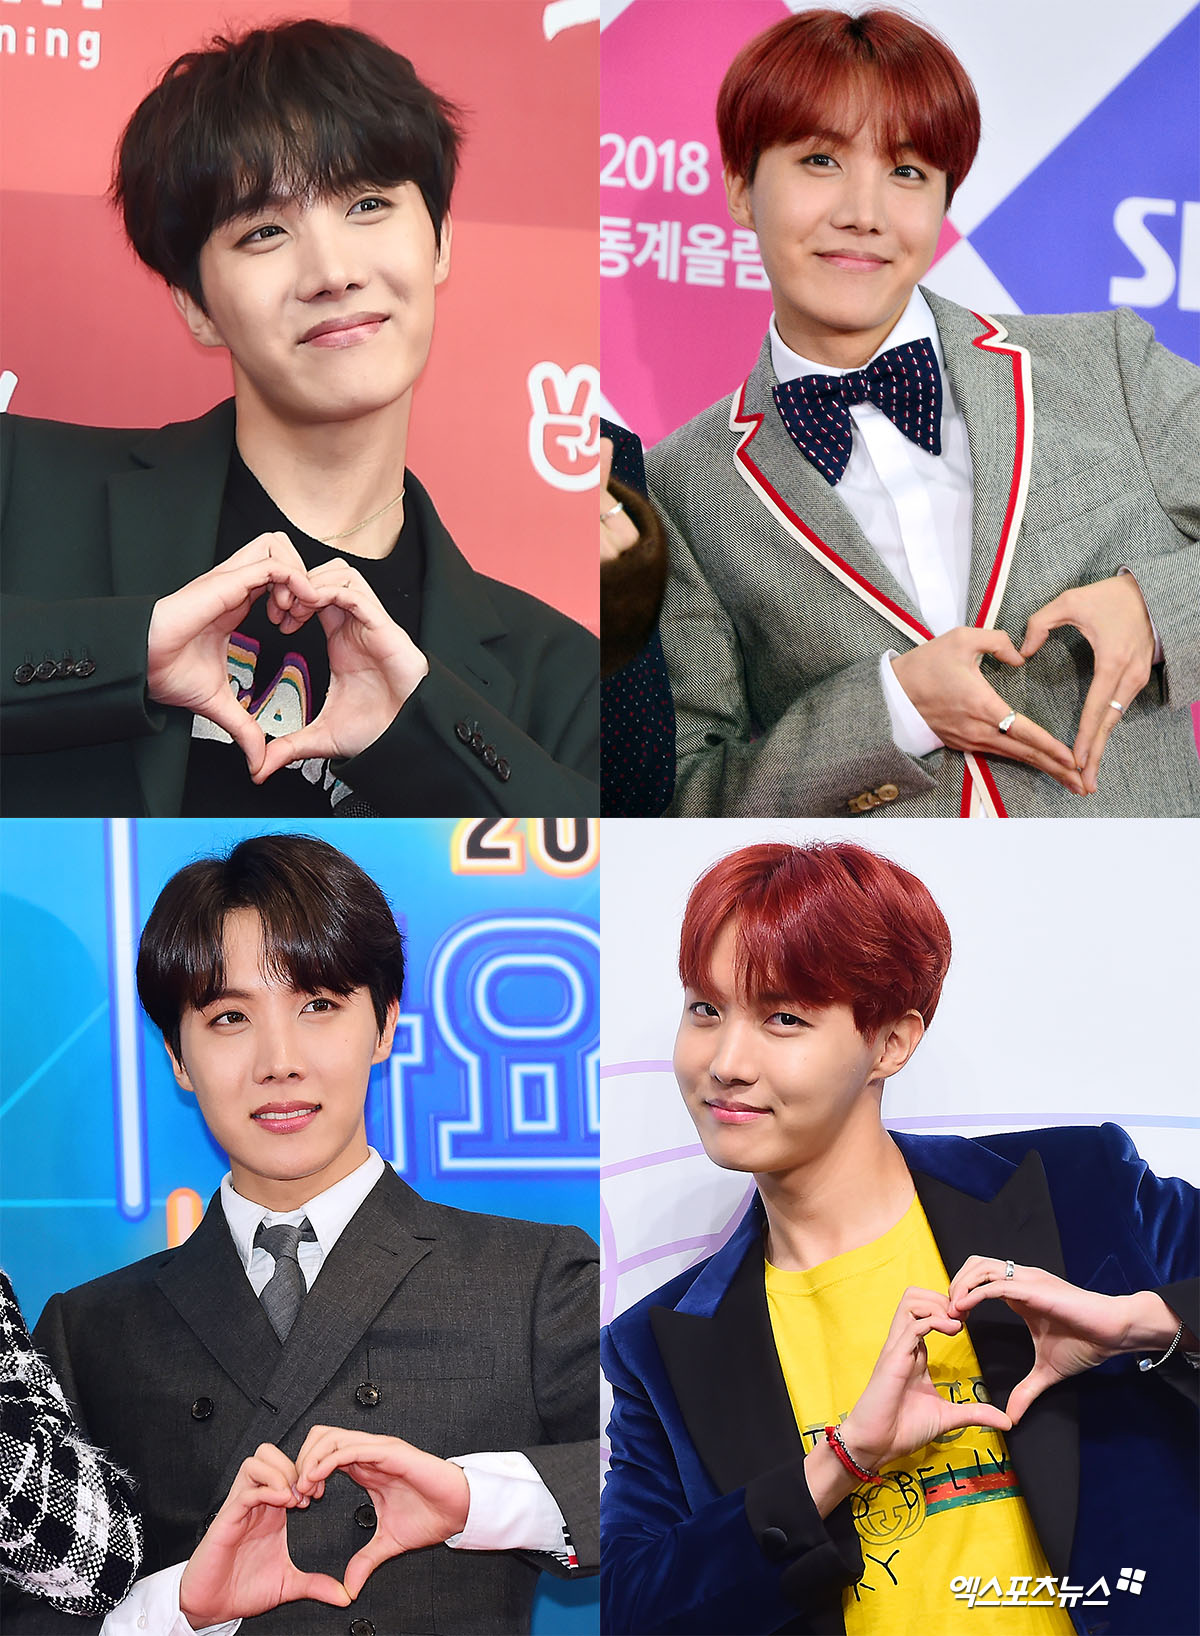 18th. BTS J-Hope, a beloved former World, celebrated her birthday.A little Gift for the former World Amys celebrating J-Hopes birthday [Ecs Hardtally], 2013From now on, I gathered the bright and playful figure of J-Hope.On the other hand, BTS will release its 4th album MAP OF THE SOUL: 7 at 6 pm on the 21st and the Kinetic Manifesto Film (Come Prima Performed by BTS for Lead Single) of the title song ON.